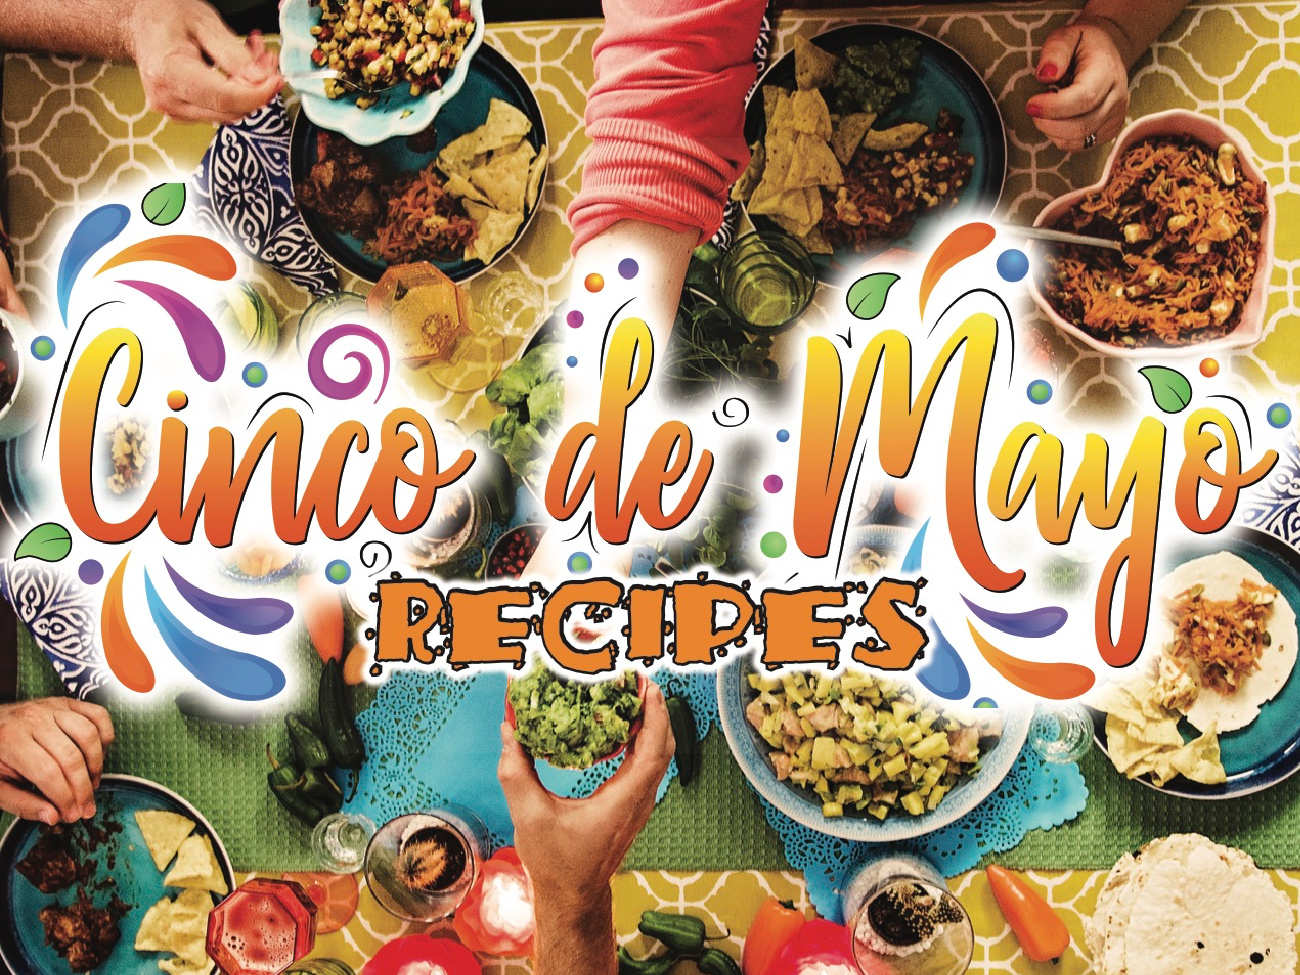 Bring Great Taste To Your Table With Great Fiesta Night Savings AND Recipes!